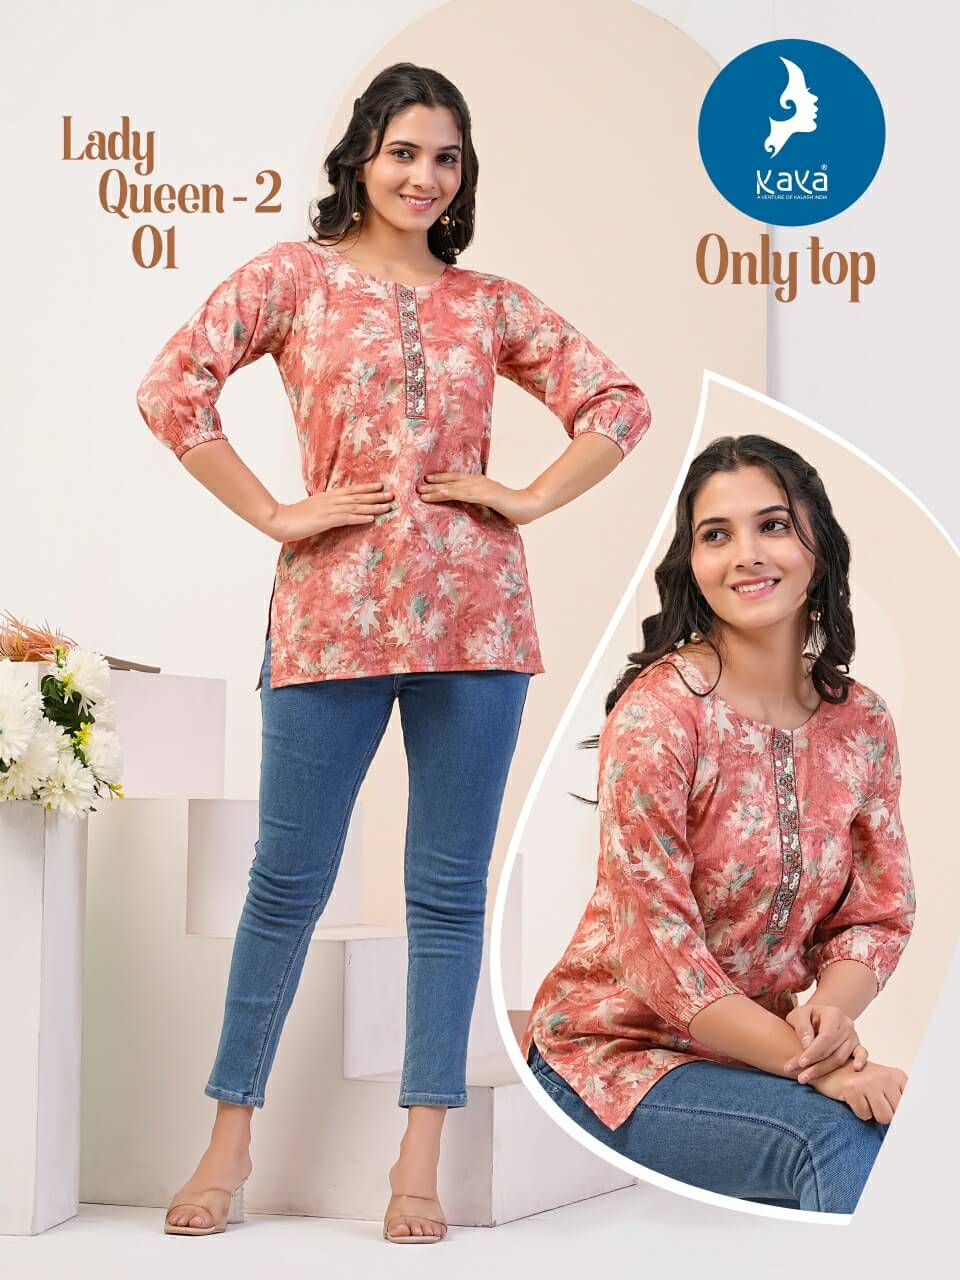 Kaya Lady Queen Vol 2 Ladies Tops Catalog collection 1